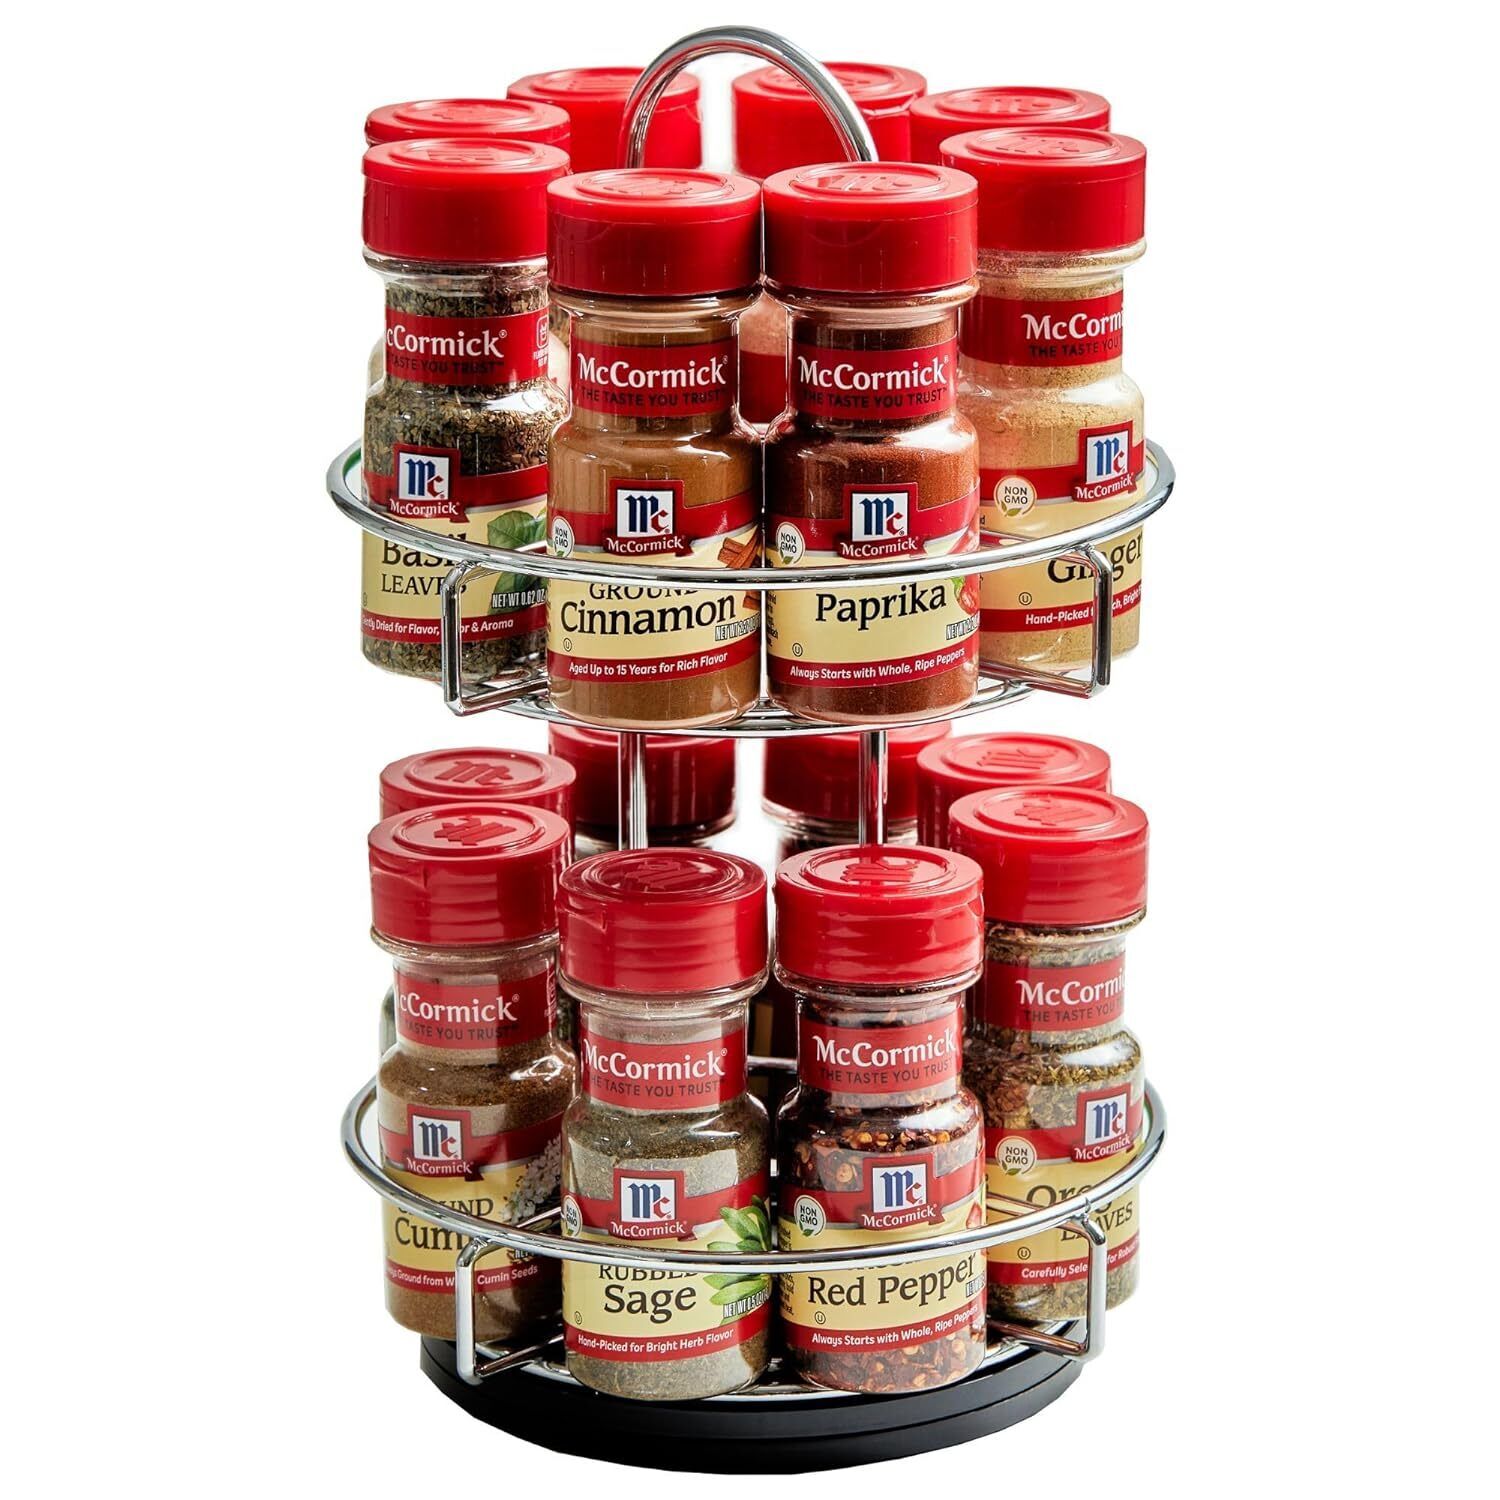 Two Tier Chrome 16 Piece Spice Rack Organizer with Spices Included, 26.09 oz